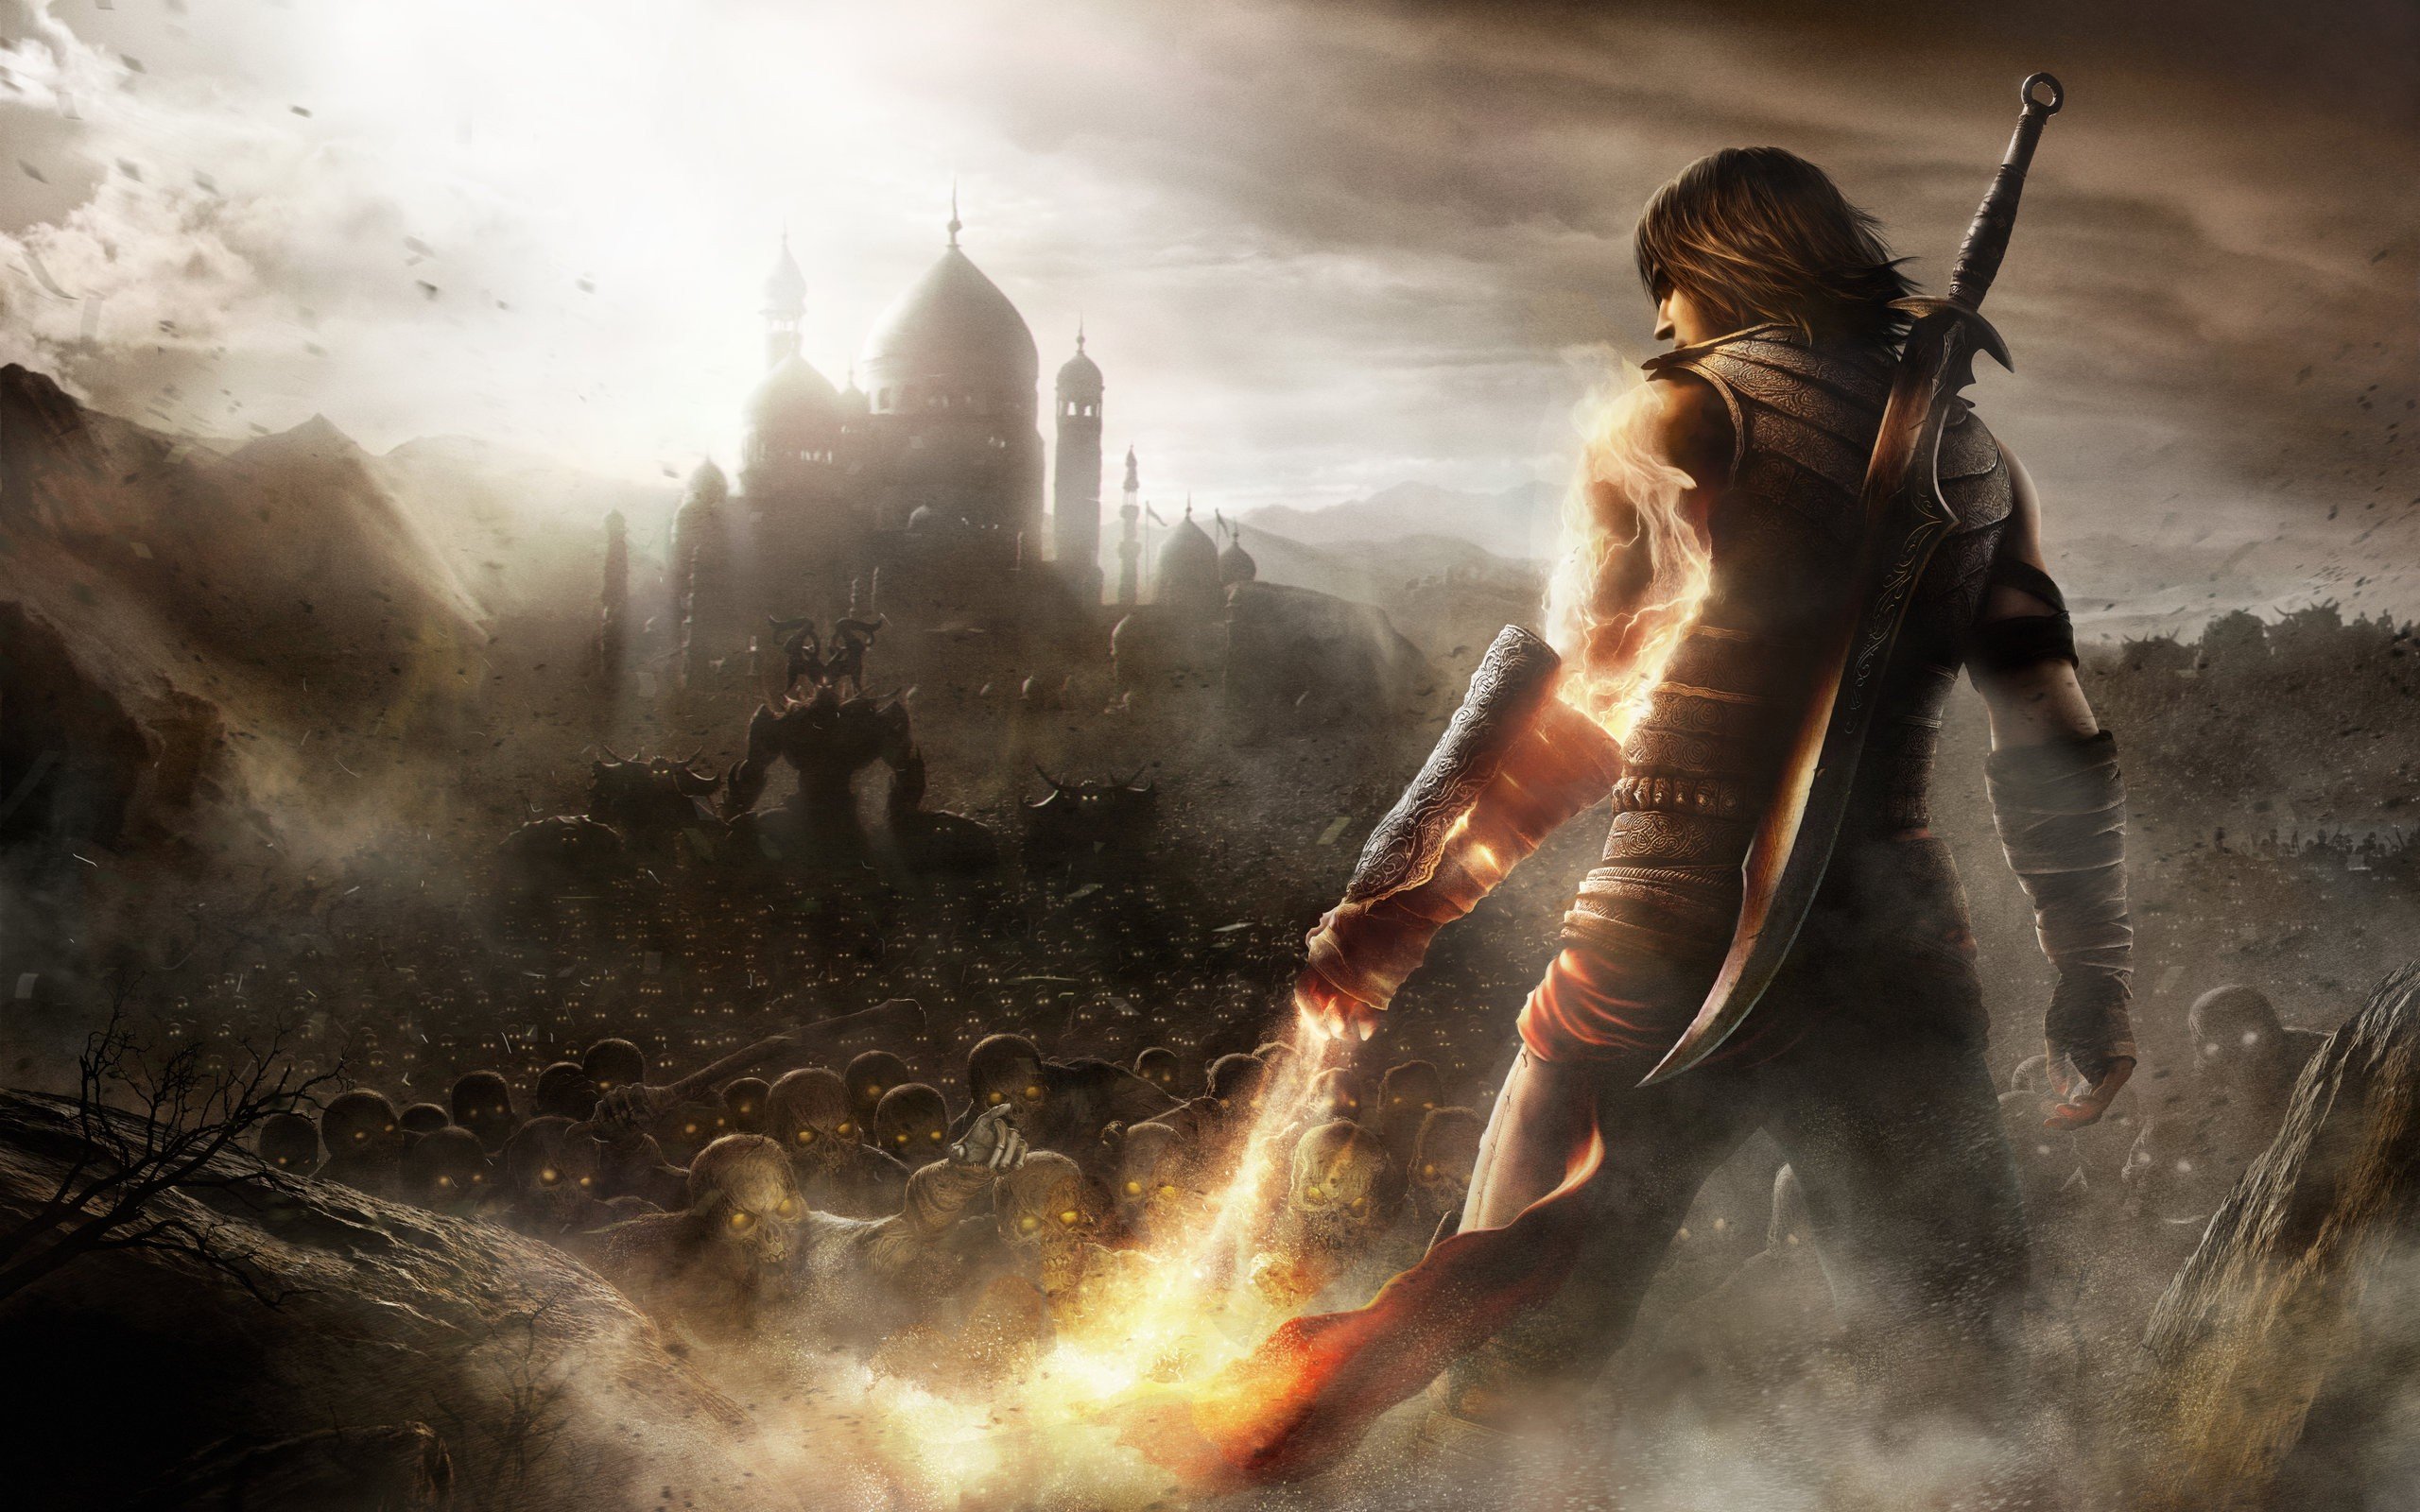 video, Games, Sand, Army, Wall, Weapons, Fantasy, Art, Prince, Of, Persia Wallpaper